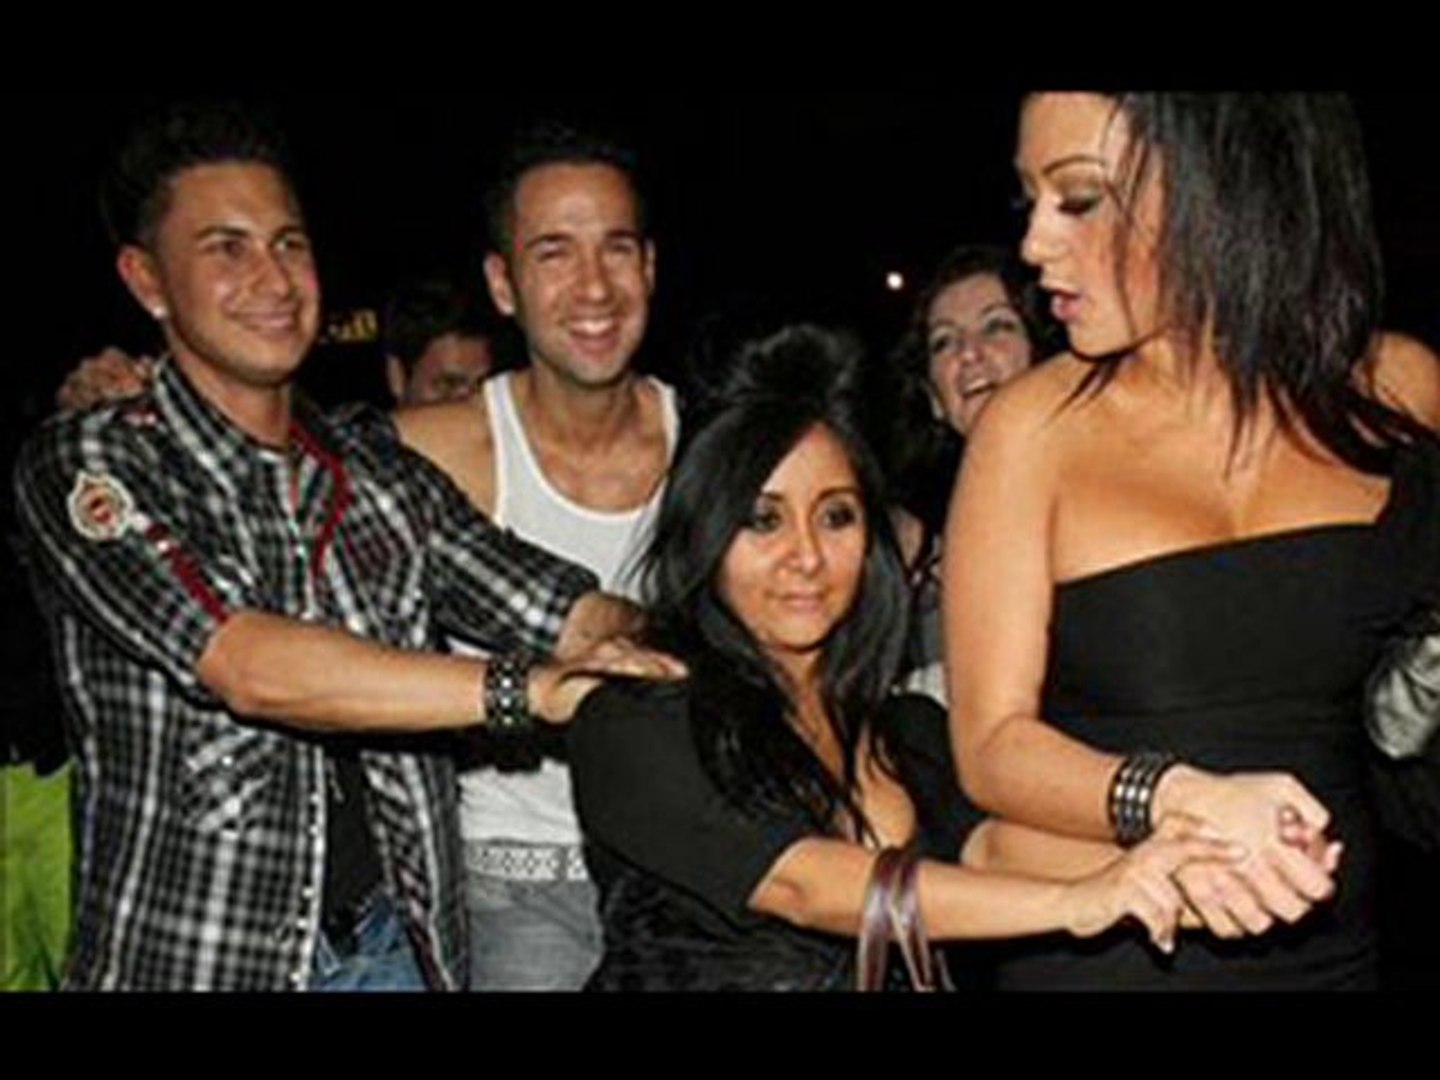 Jersey Shore - Season 2 Episode 8 "All in the family" - video Dailymotion